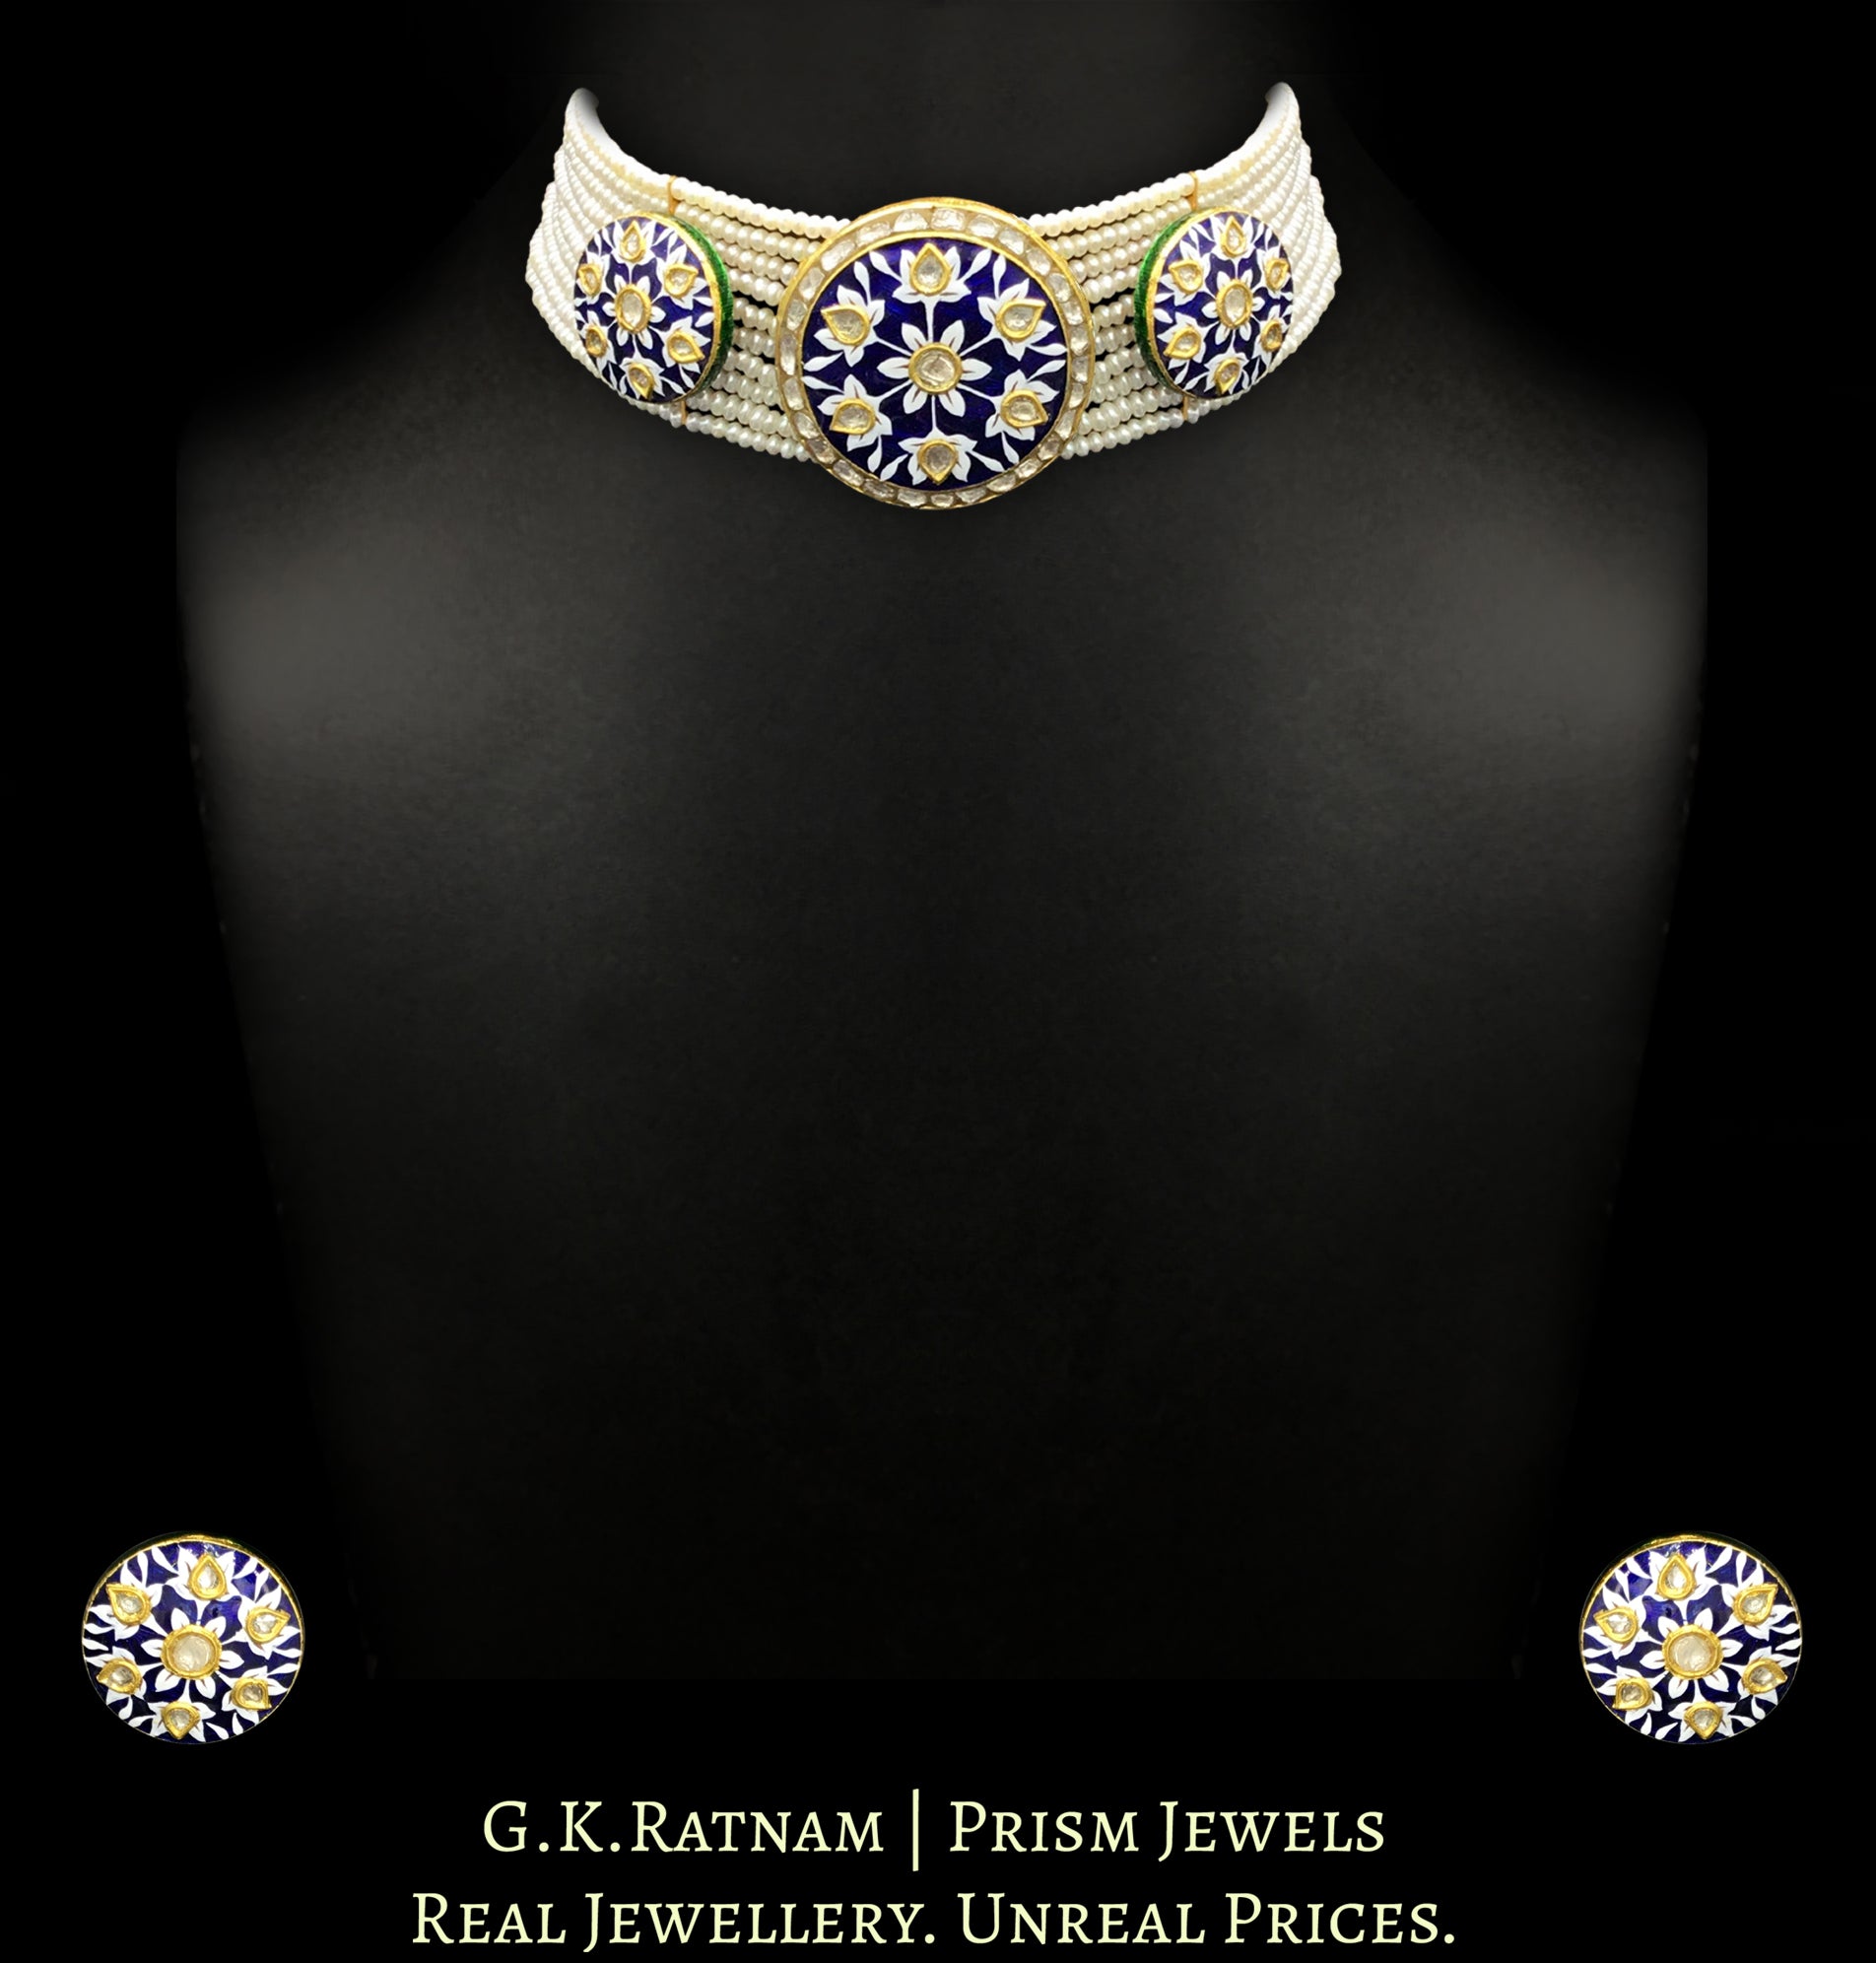 23k Gold and Diamond Polki Choker Necklace Set with exquisite blue pottery